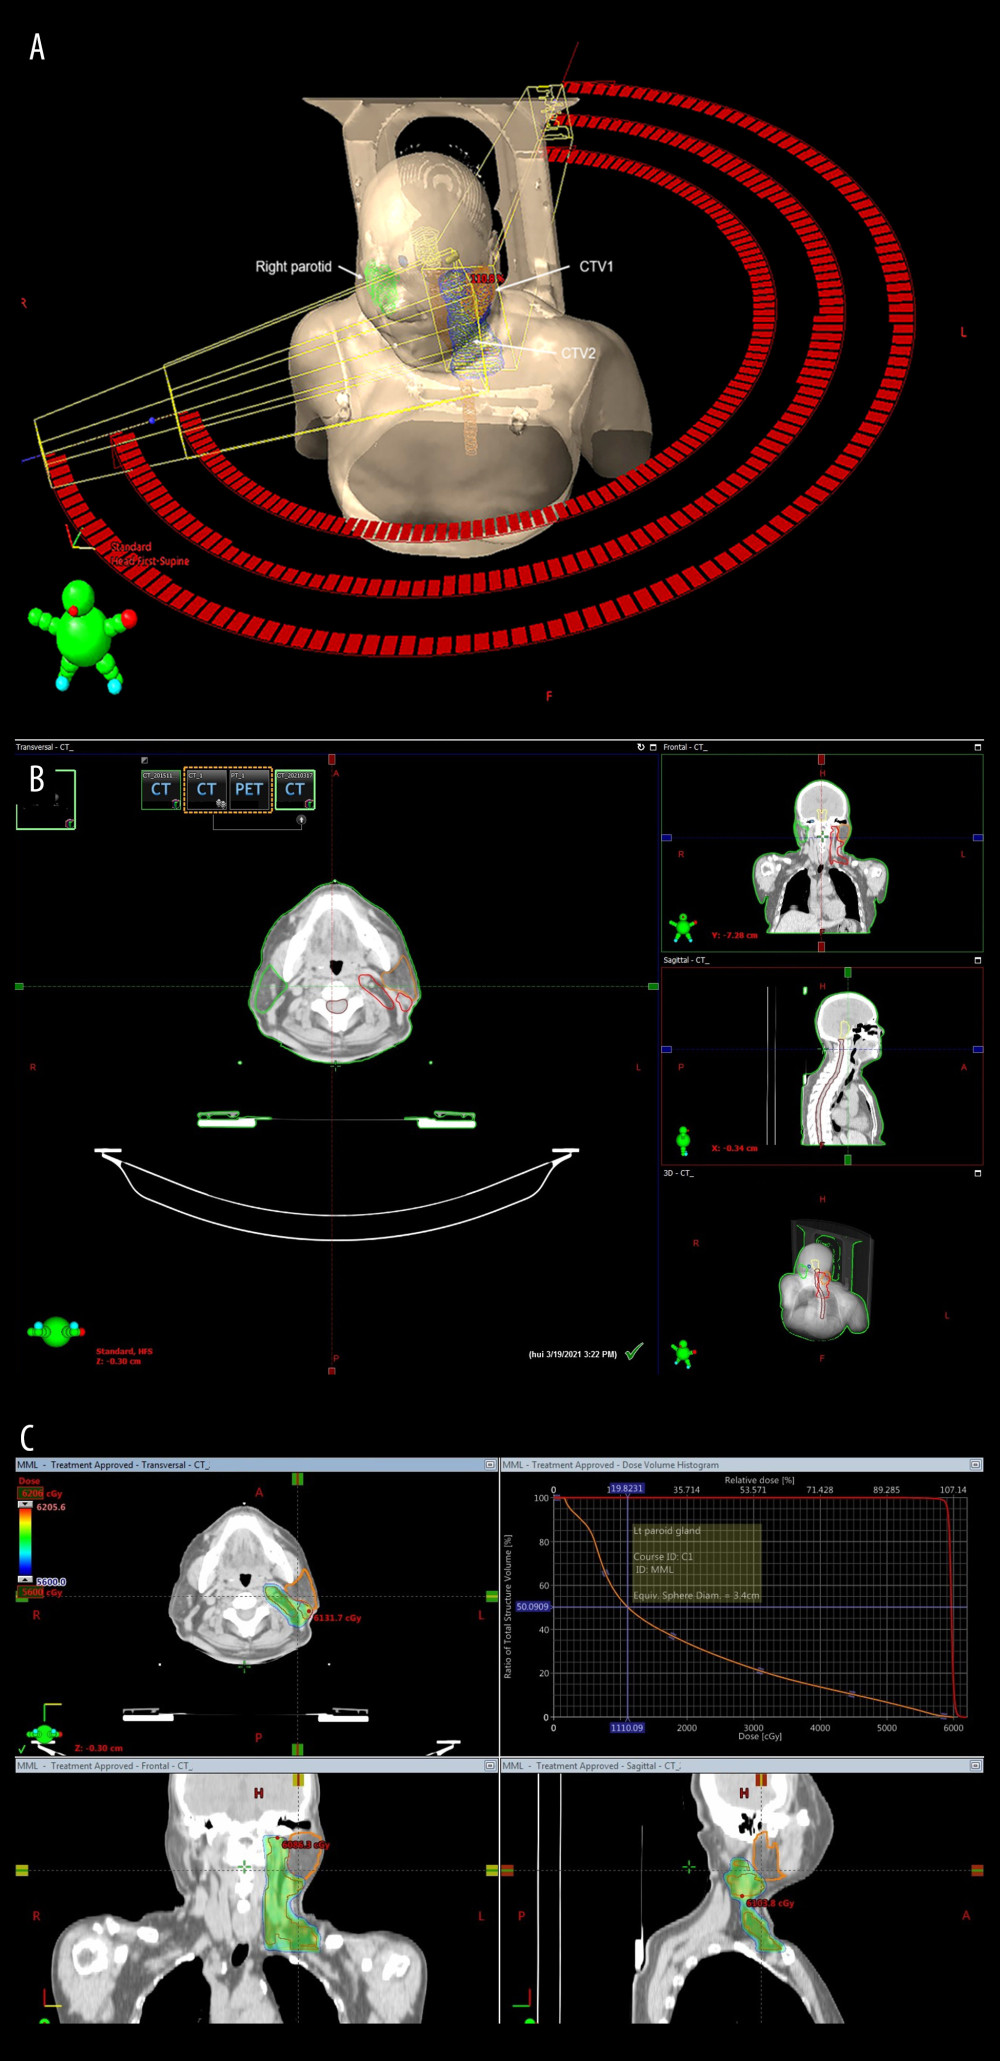 (A) CTV including the left parotid tumor bed and left neck lymph nodes at levels IB, II, III, IV, VA, and VB. (B) Axial CT slices with CTV in redline, and organ at risk with remaining left parotid gland in orange line, right parotid gland in green line. (C) Dose distribution in colorwash and dose-volume histogram.